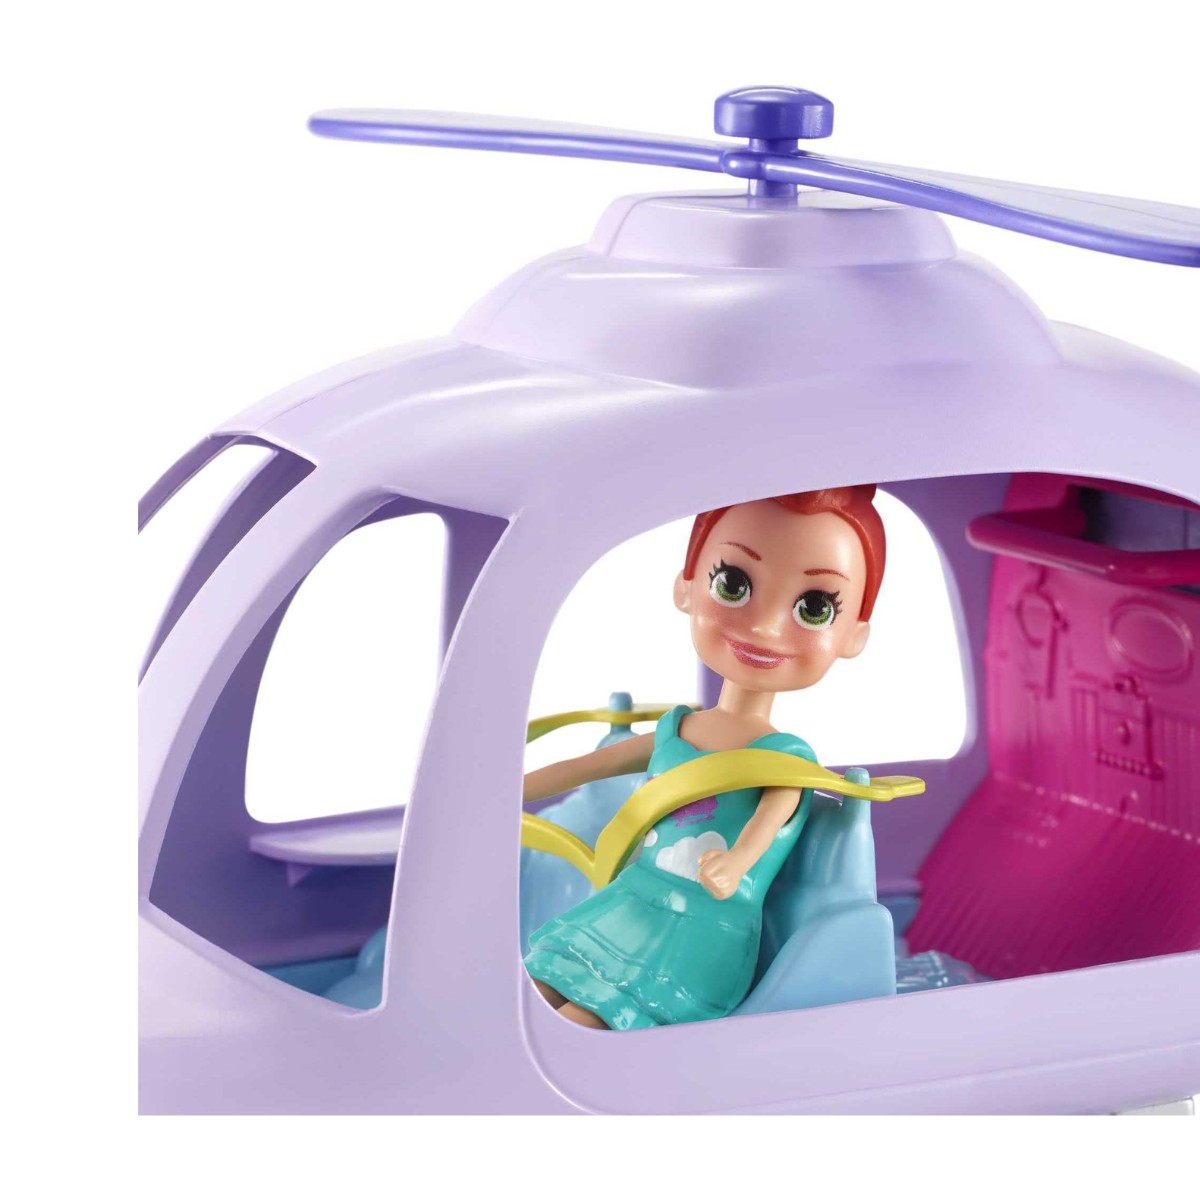 Lat Helicopter Playset